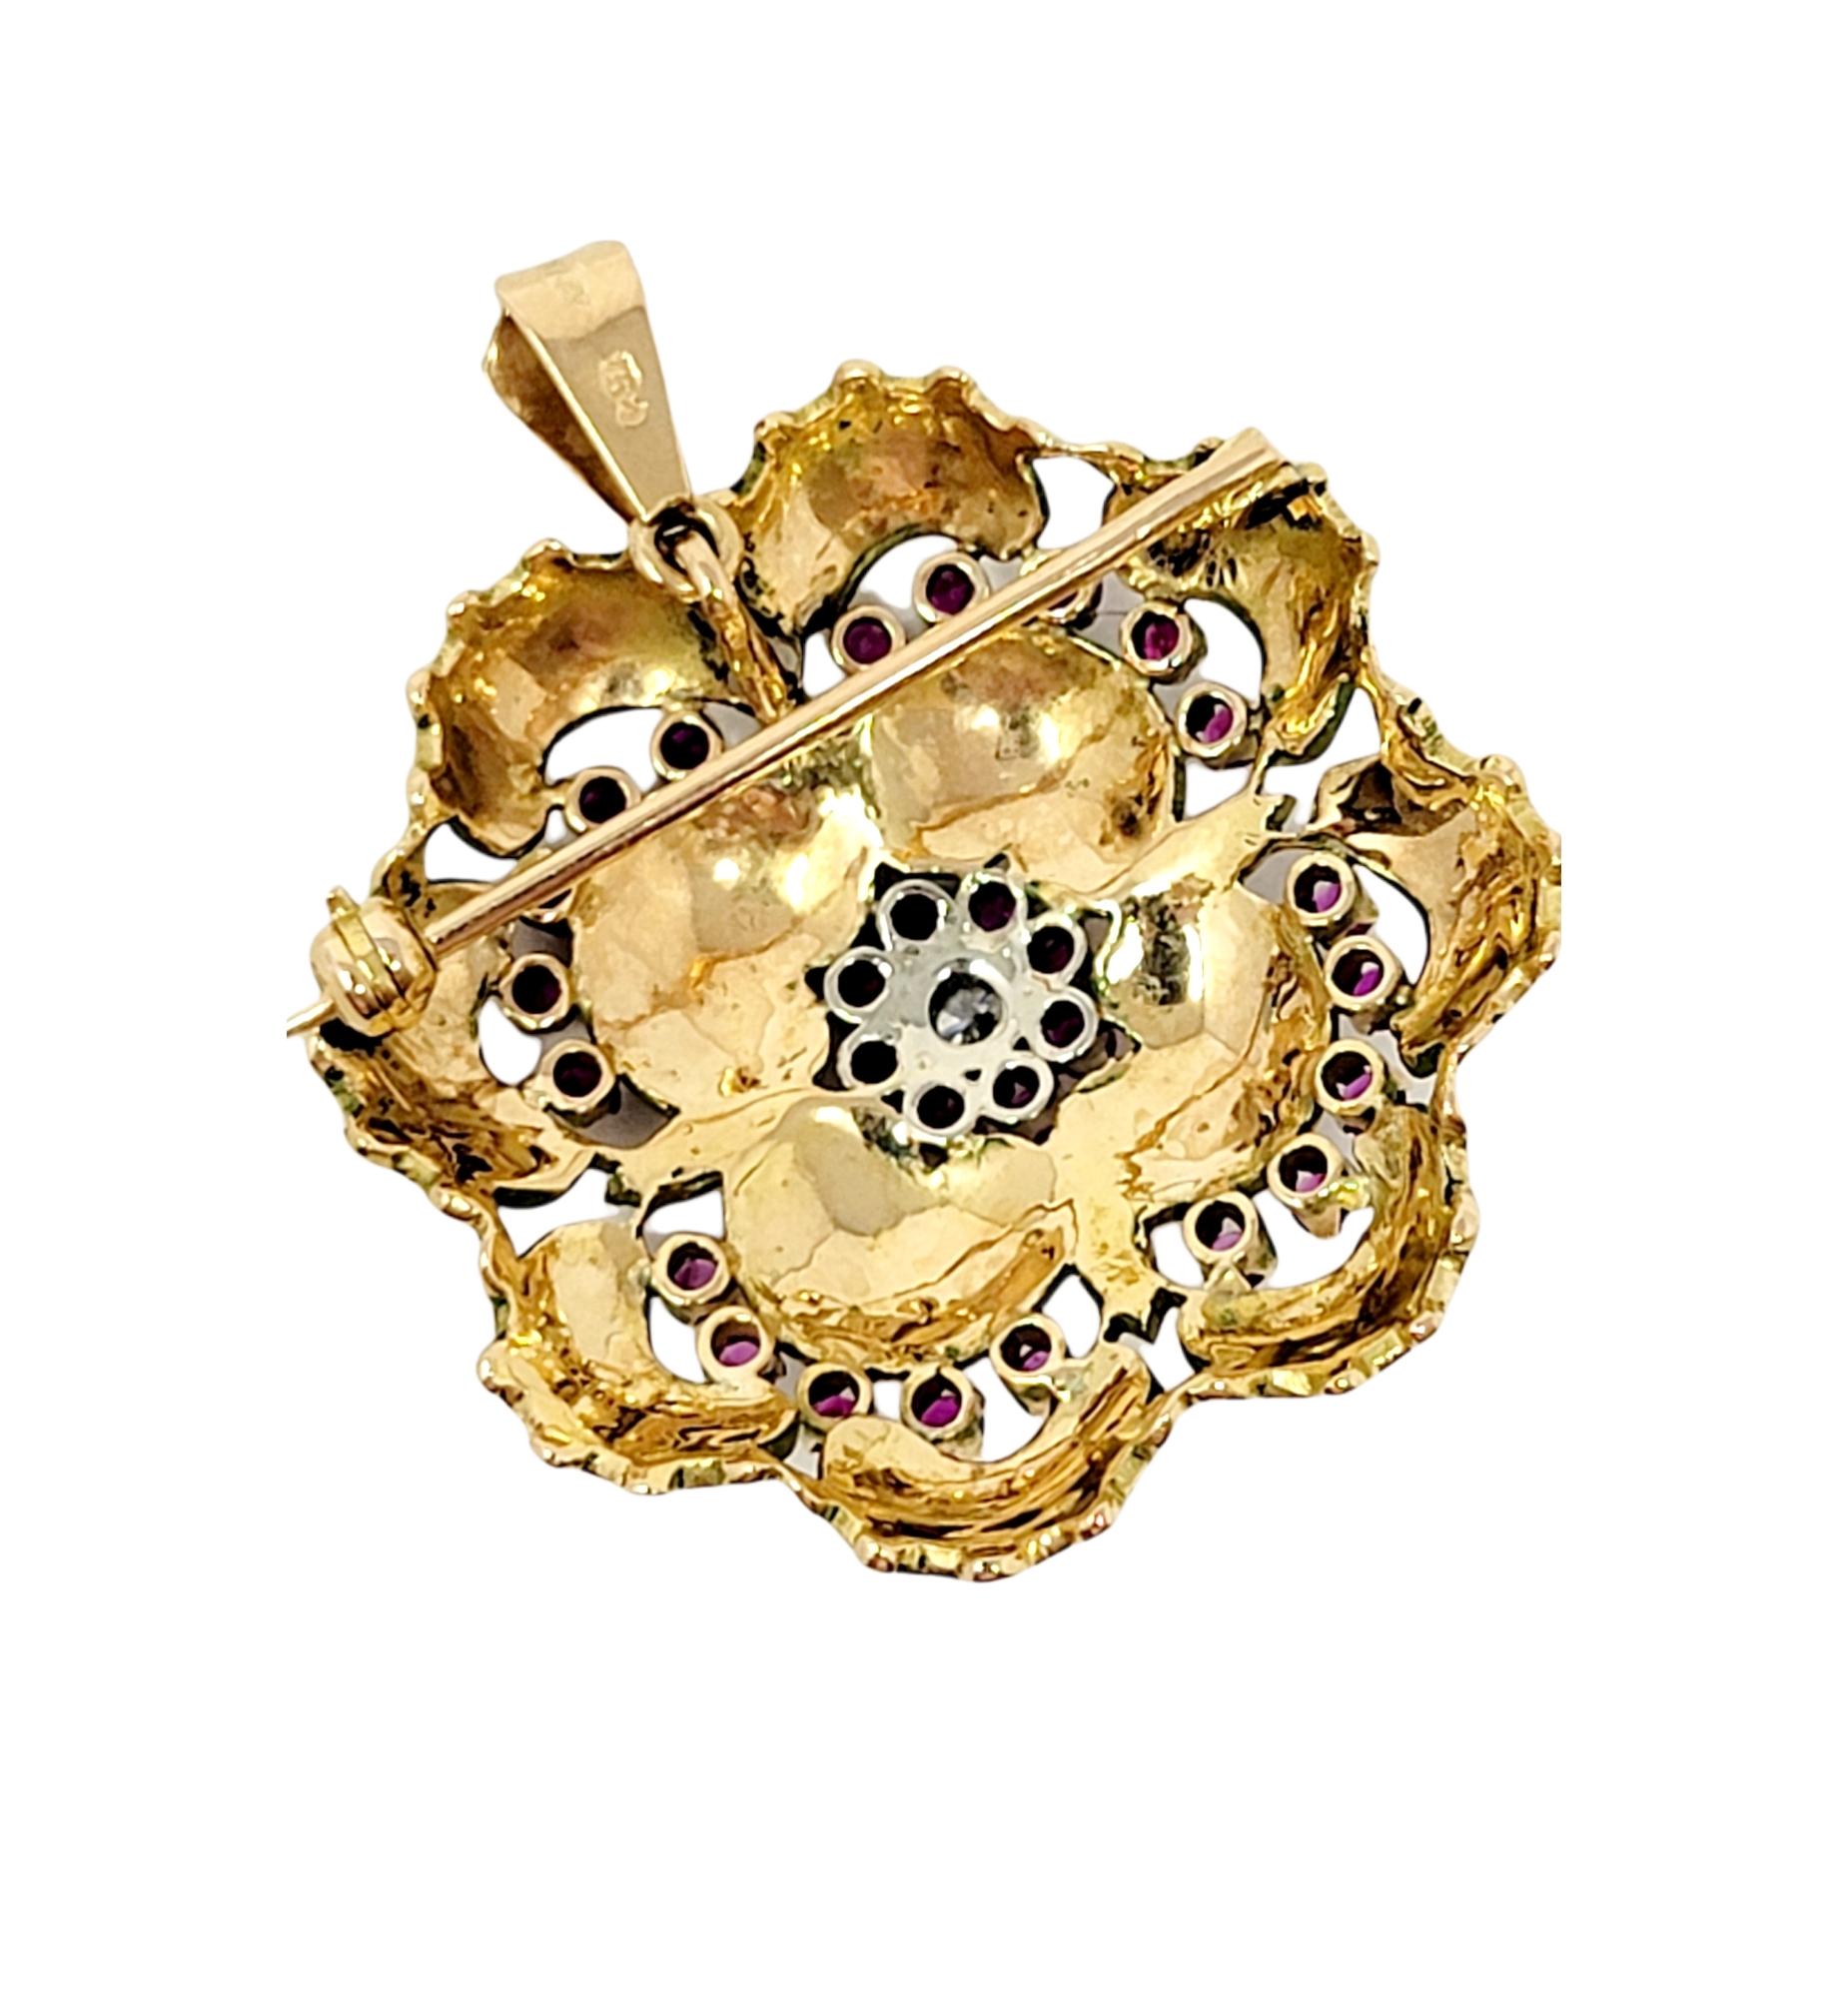 Diamond, Ruby, Sapphire and Pearl Pendant / Brooch with Link Chain 18 Karat Gold For Sale 3